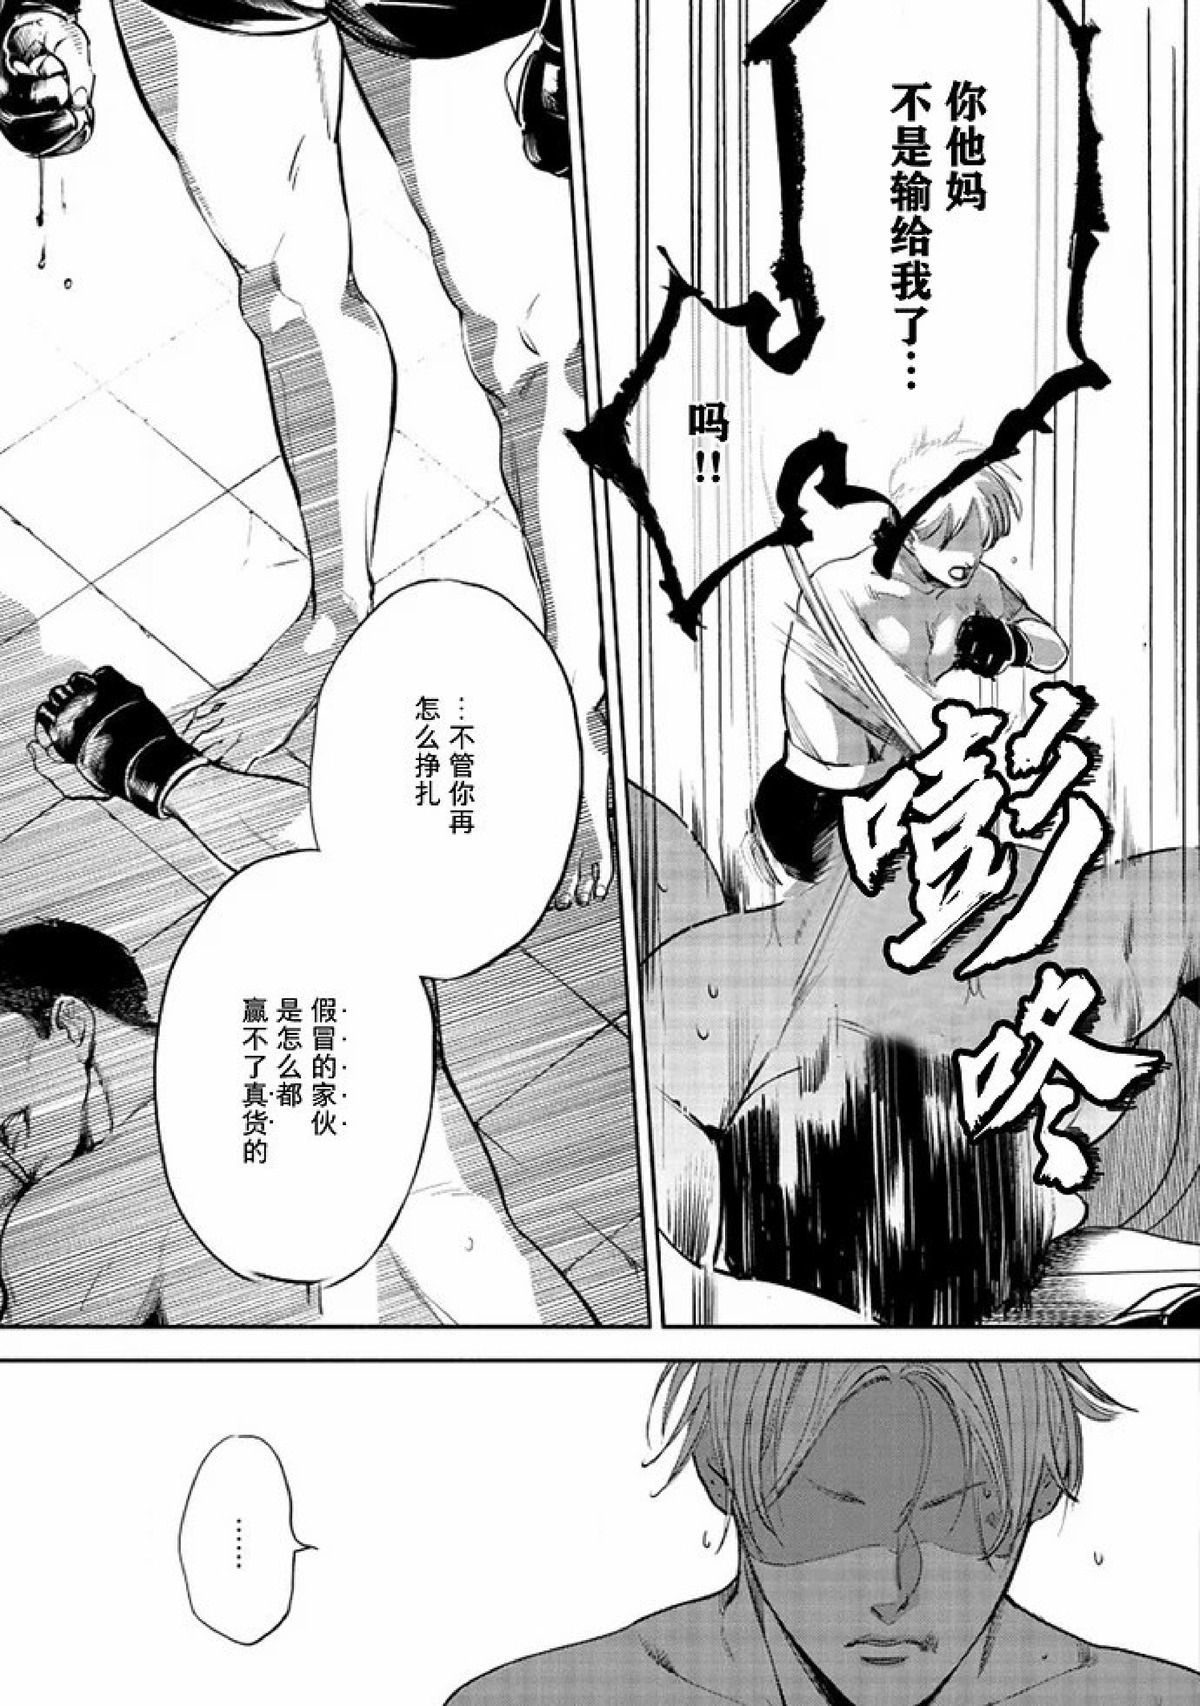 【Two sides of the same coin[腐漫]】漫画-（上卷01-02）章节漫画下拉式图片-71.jpg